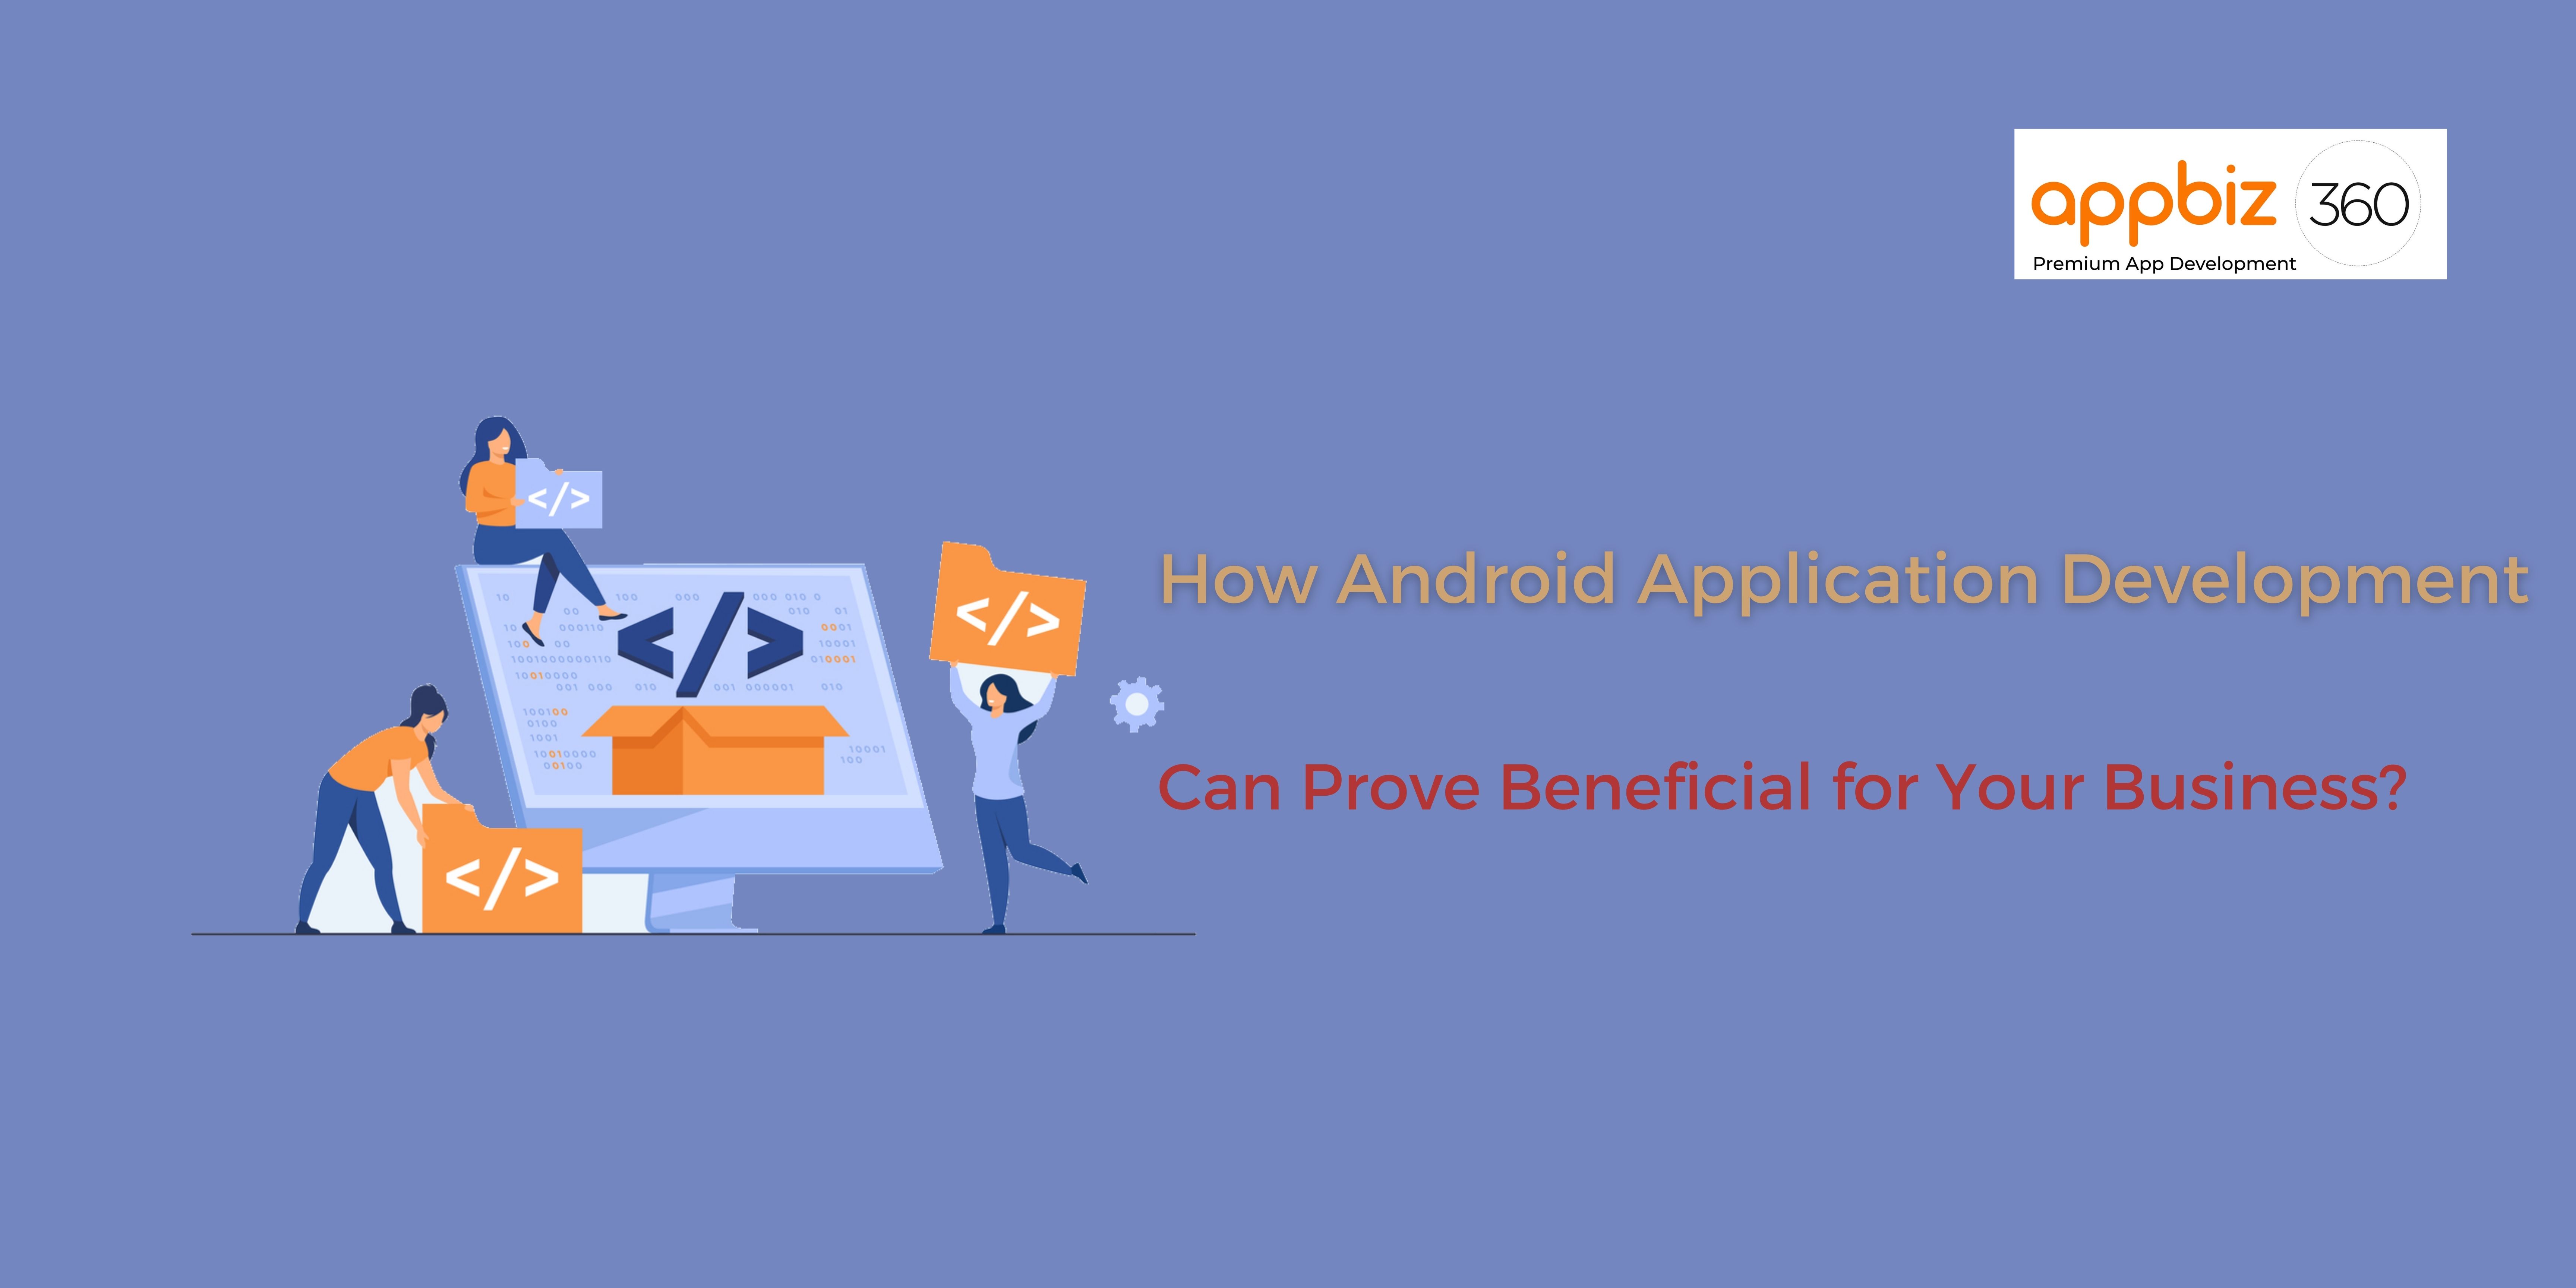 How Android Application Development Can Prove Beneficial for Your Business?